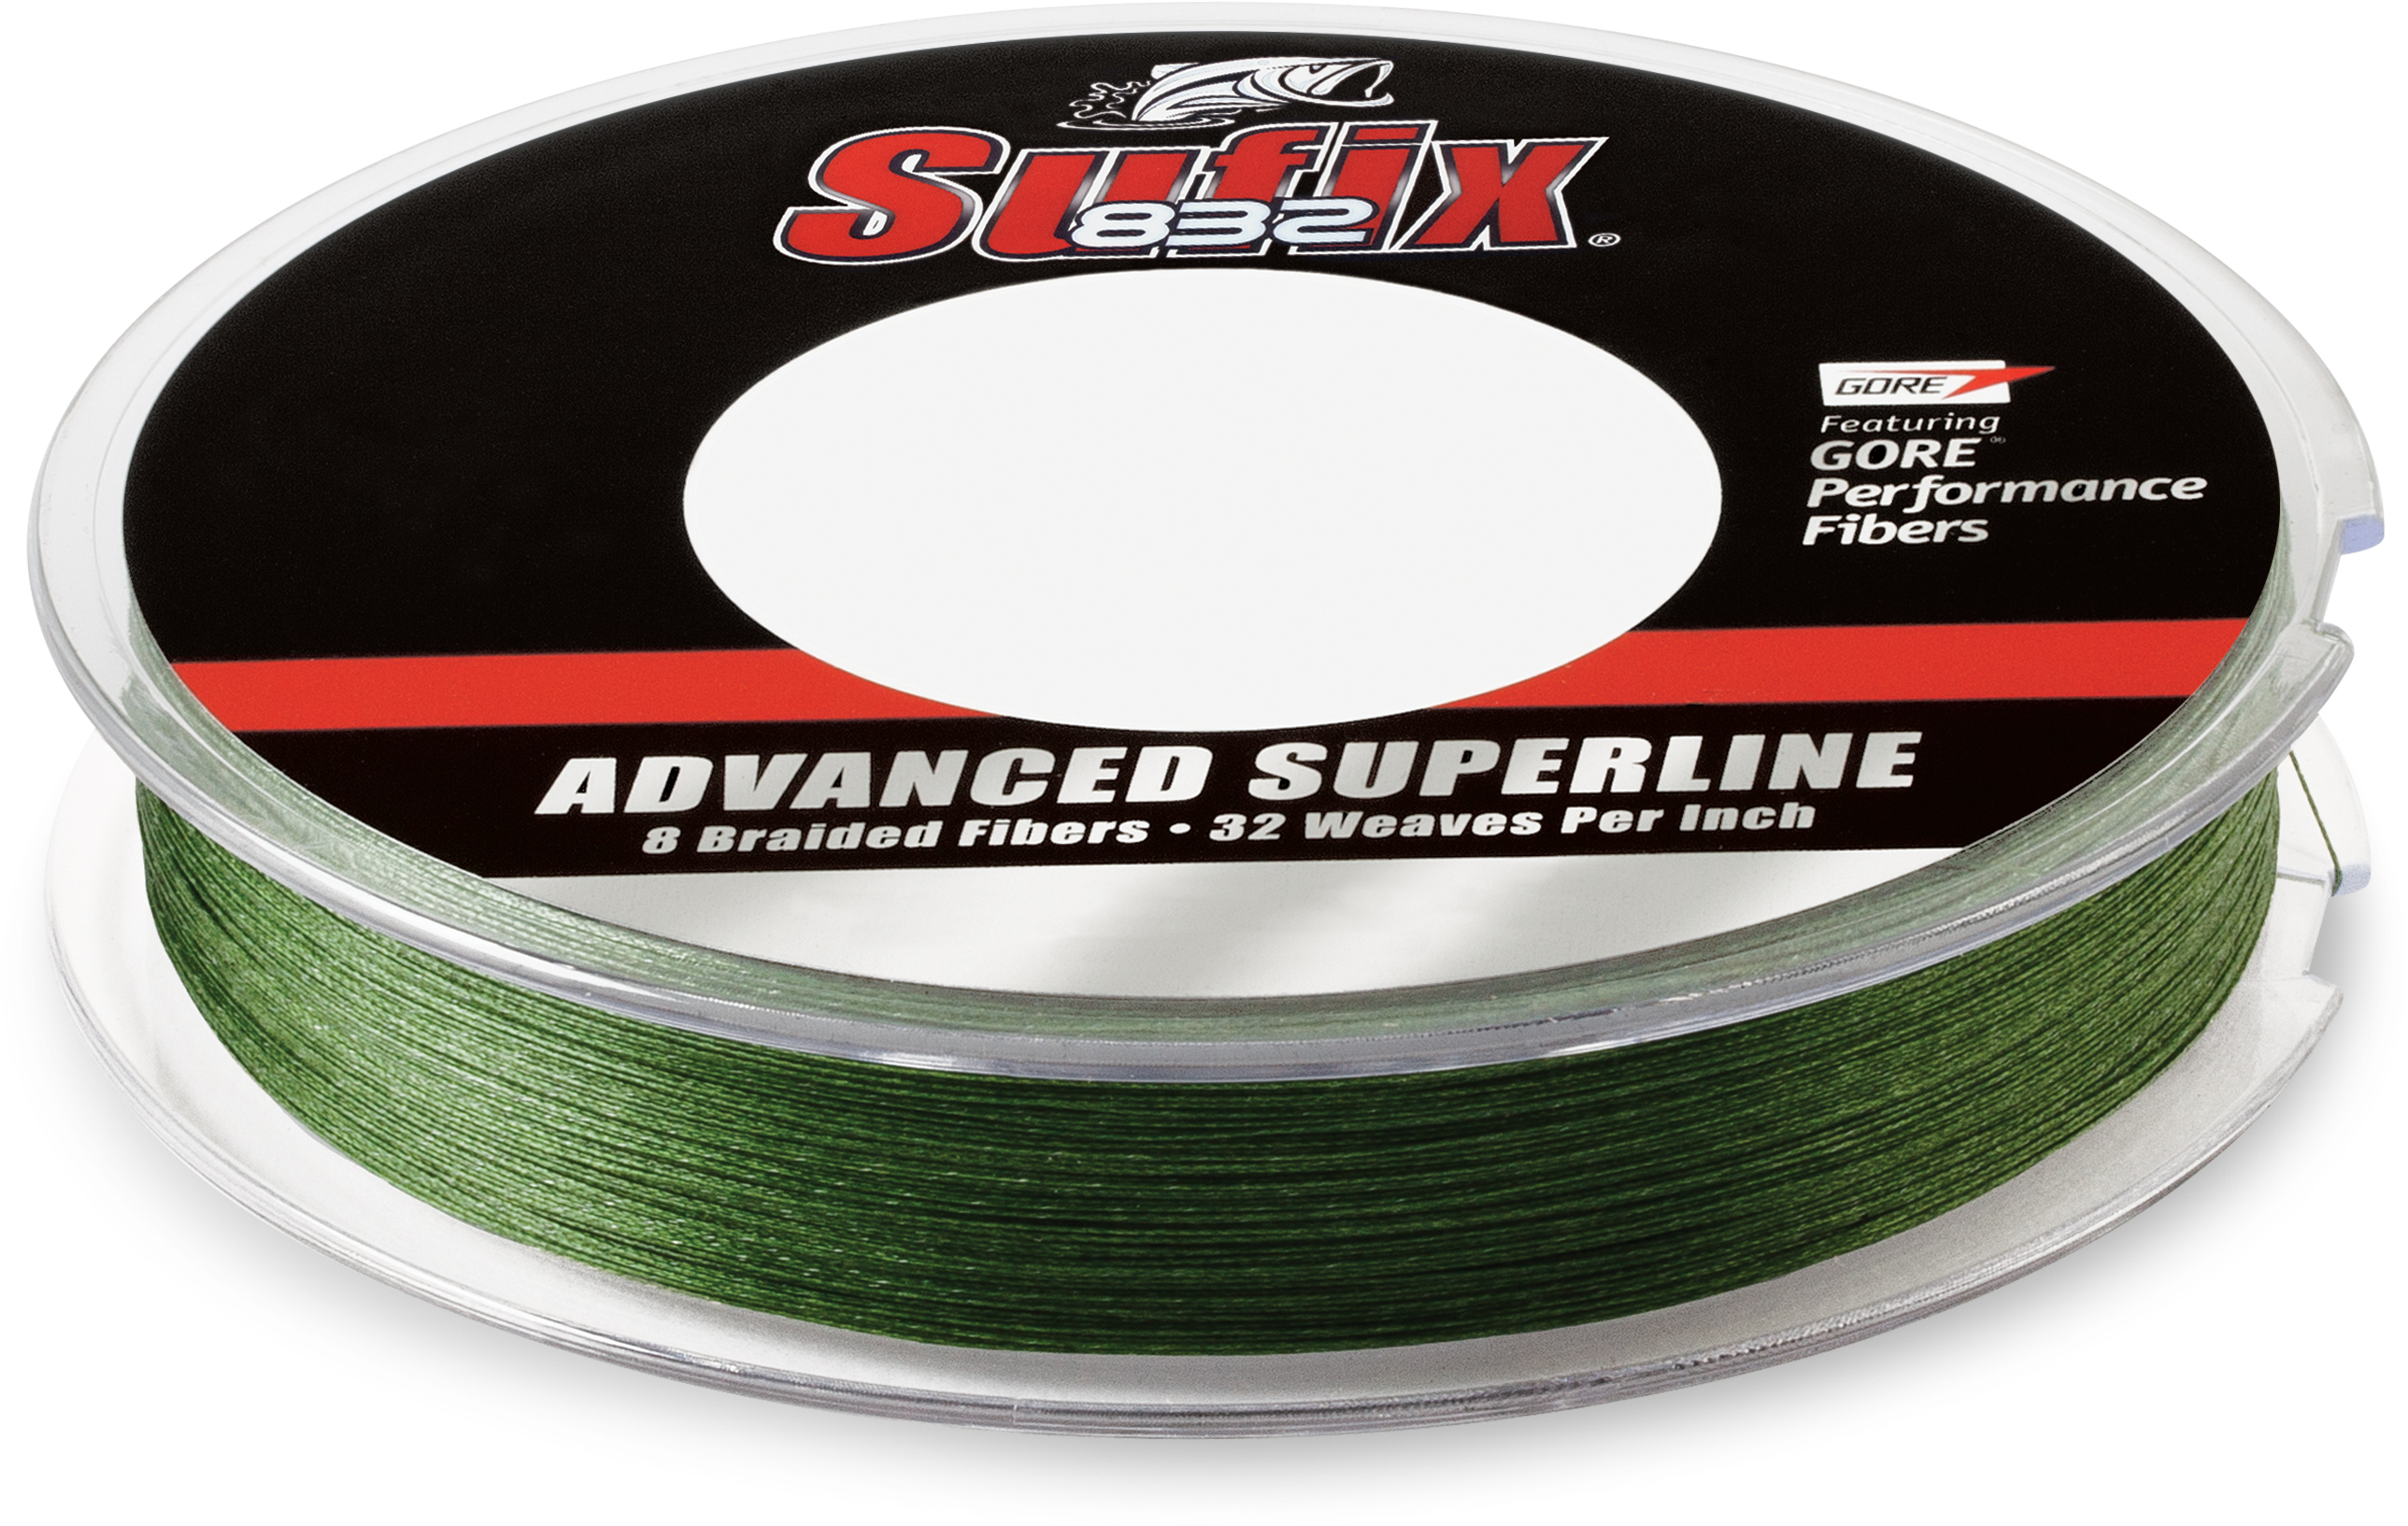 https://www.precisionfishing.com/img/products/025/025%20Sufix%20832%20Advanced%20Superline%20Braided%20300%20Yds%20-%20Lo-Vis%20Green.jpg